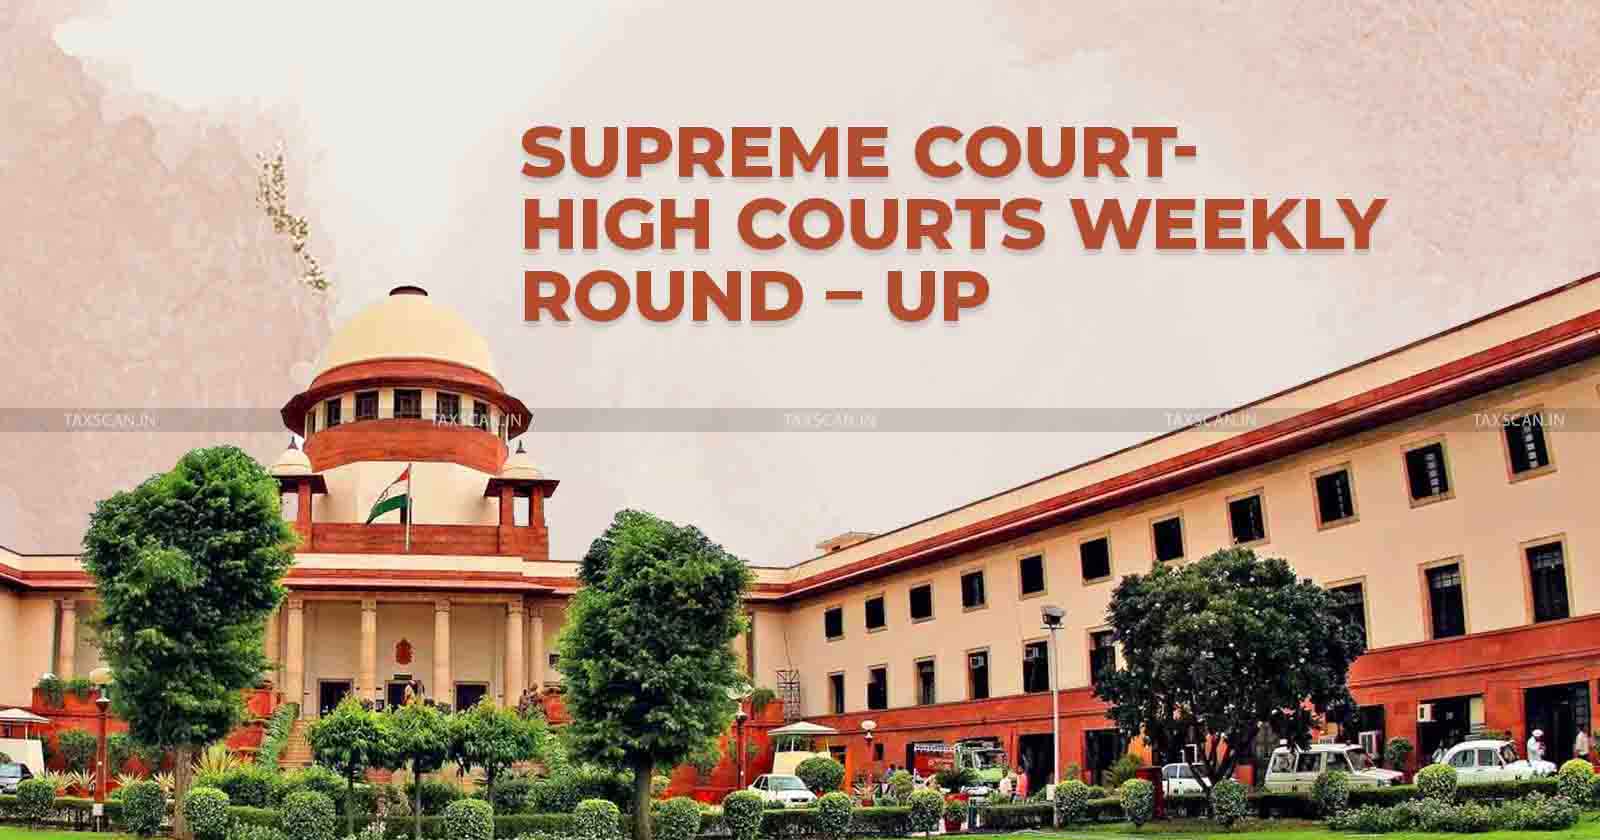 Supreme Court and High Court Weekly Round-Up - Supreme Court - High Court Weekly Round-Up - Weekly Round-Up - High Court - taxscan